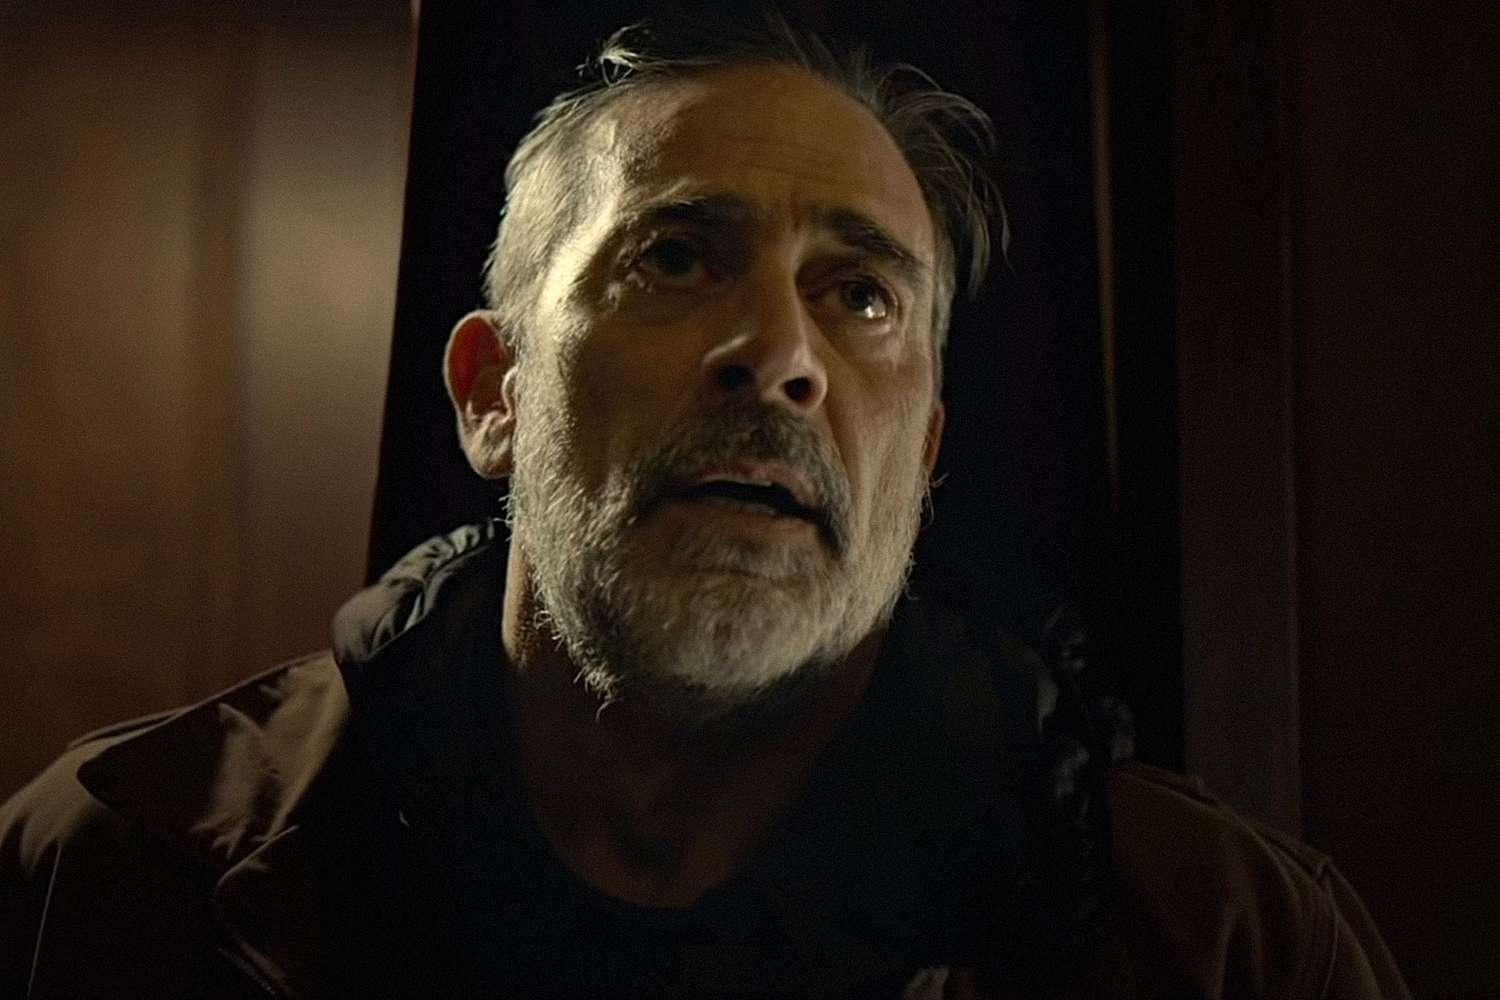 Jeffrey Dean Morgan as Gerald in The Unholy, which premiered on April 2, 2021